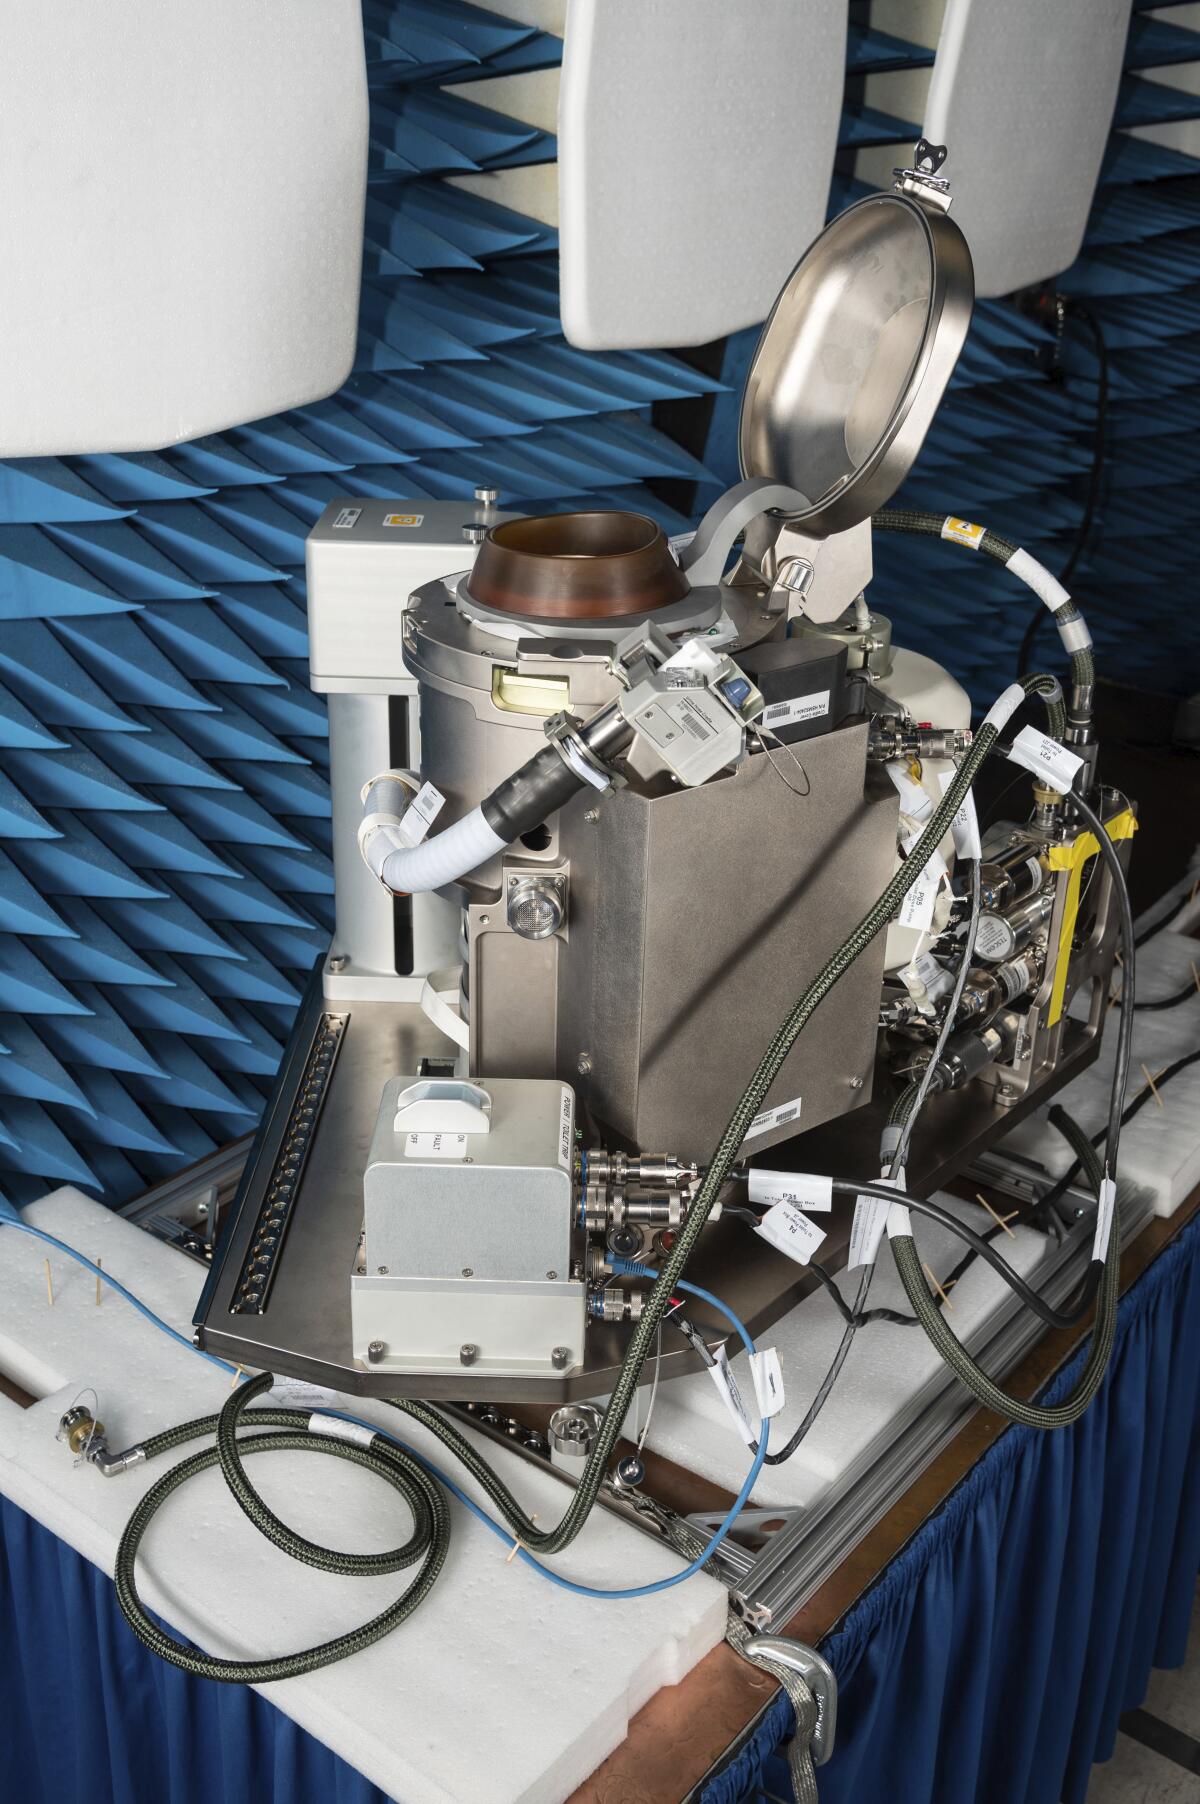 NASA's new space toilet, officially known as the Universal Waste Management System